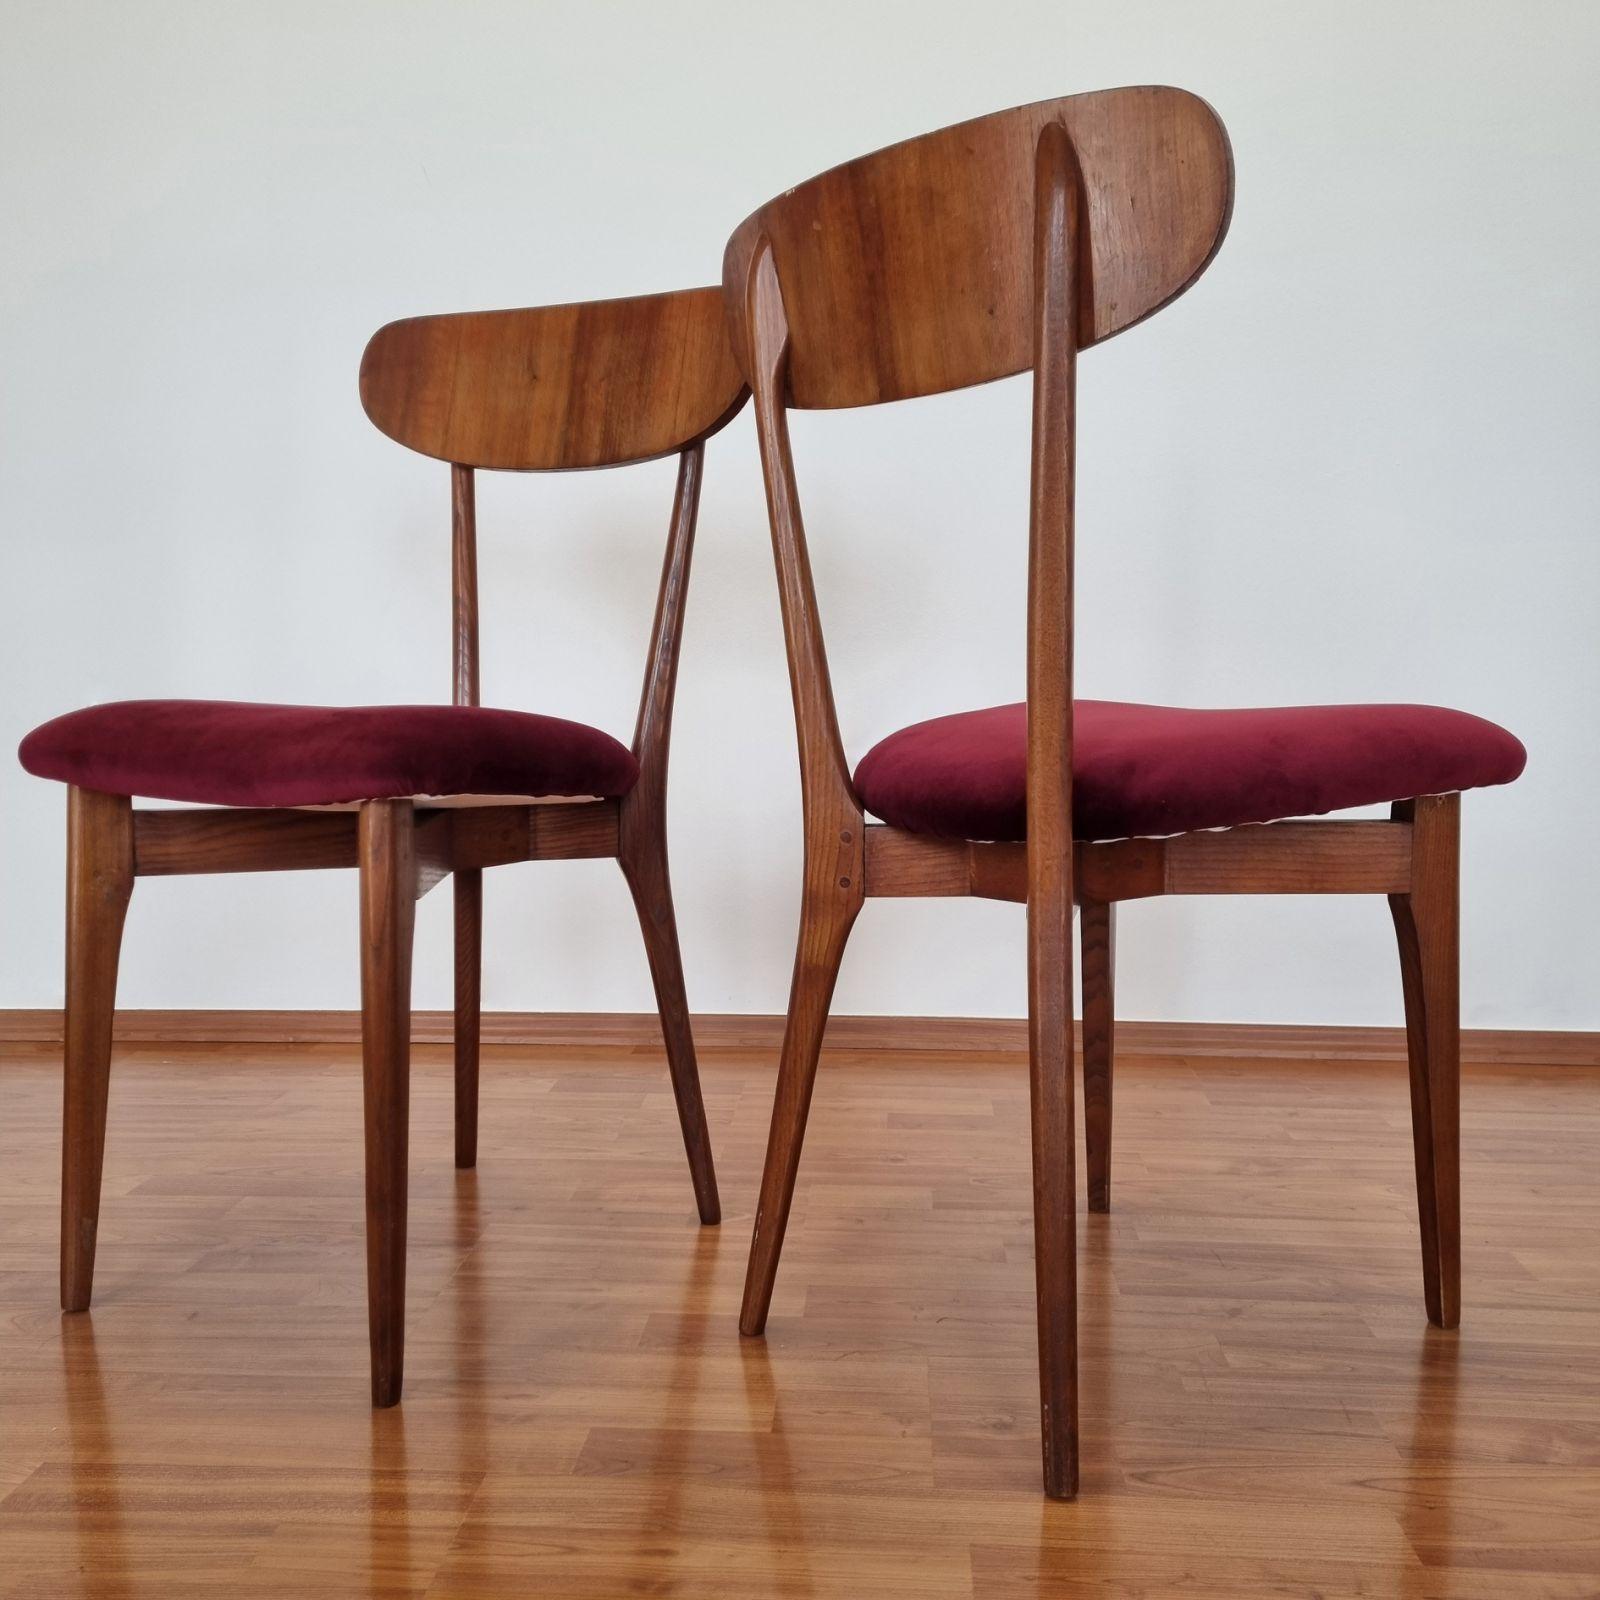 Midcentury Italian Dining Chairs, Ico Parisi Style, Italy 60s, Set of 6 For Sale 3